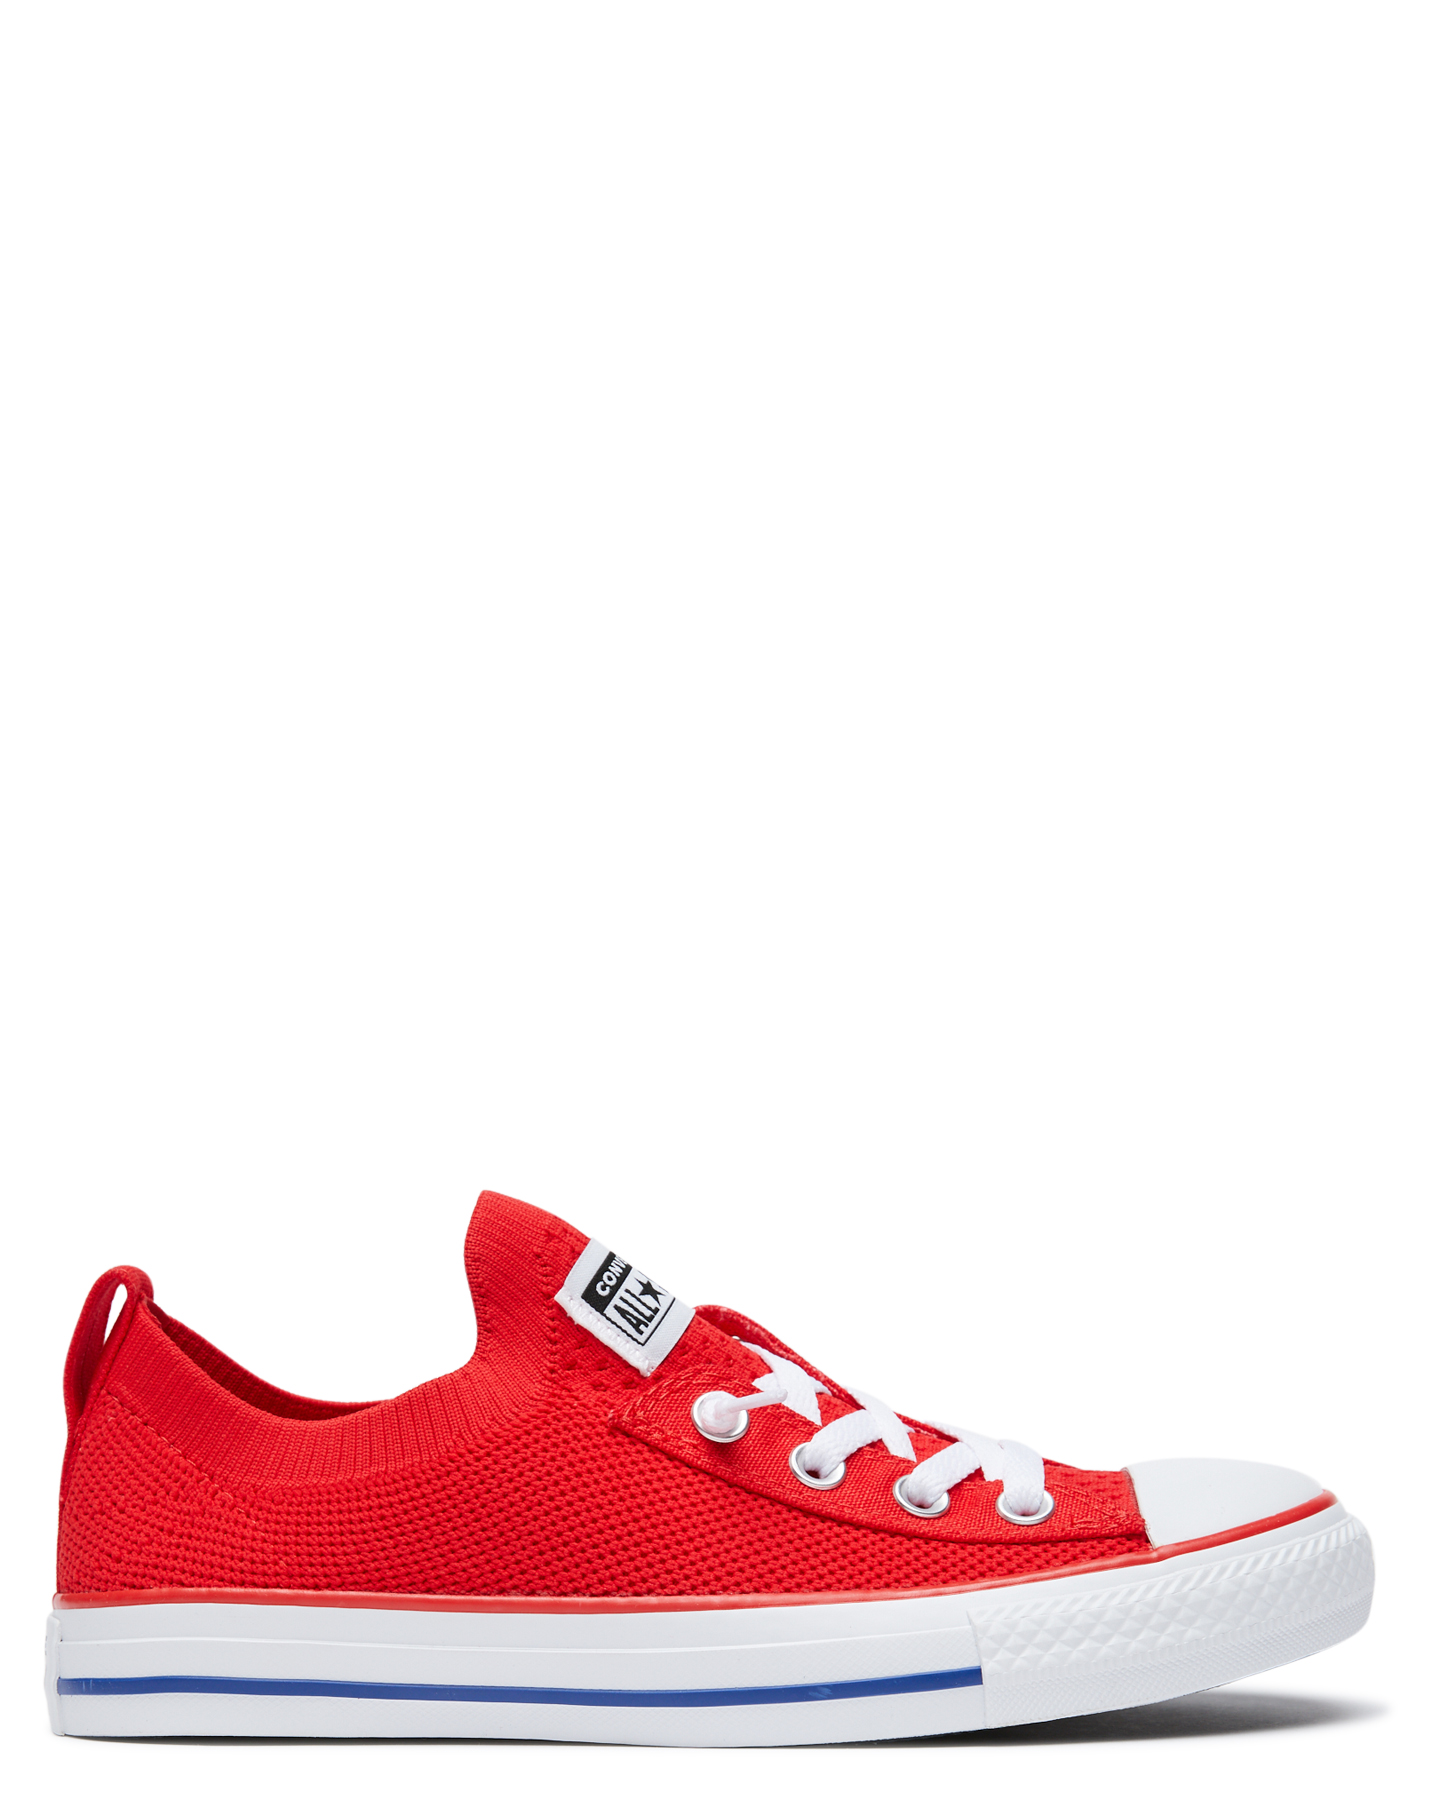 red women's converse shoes